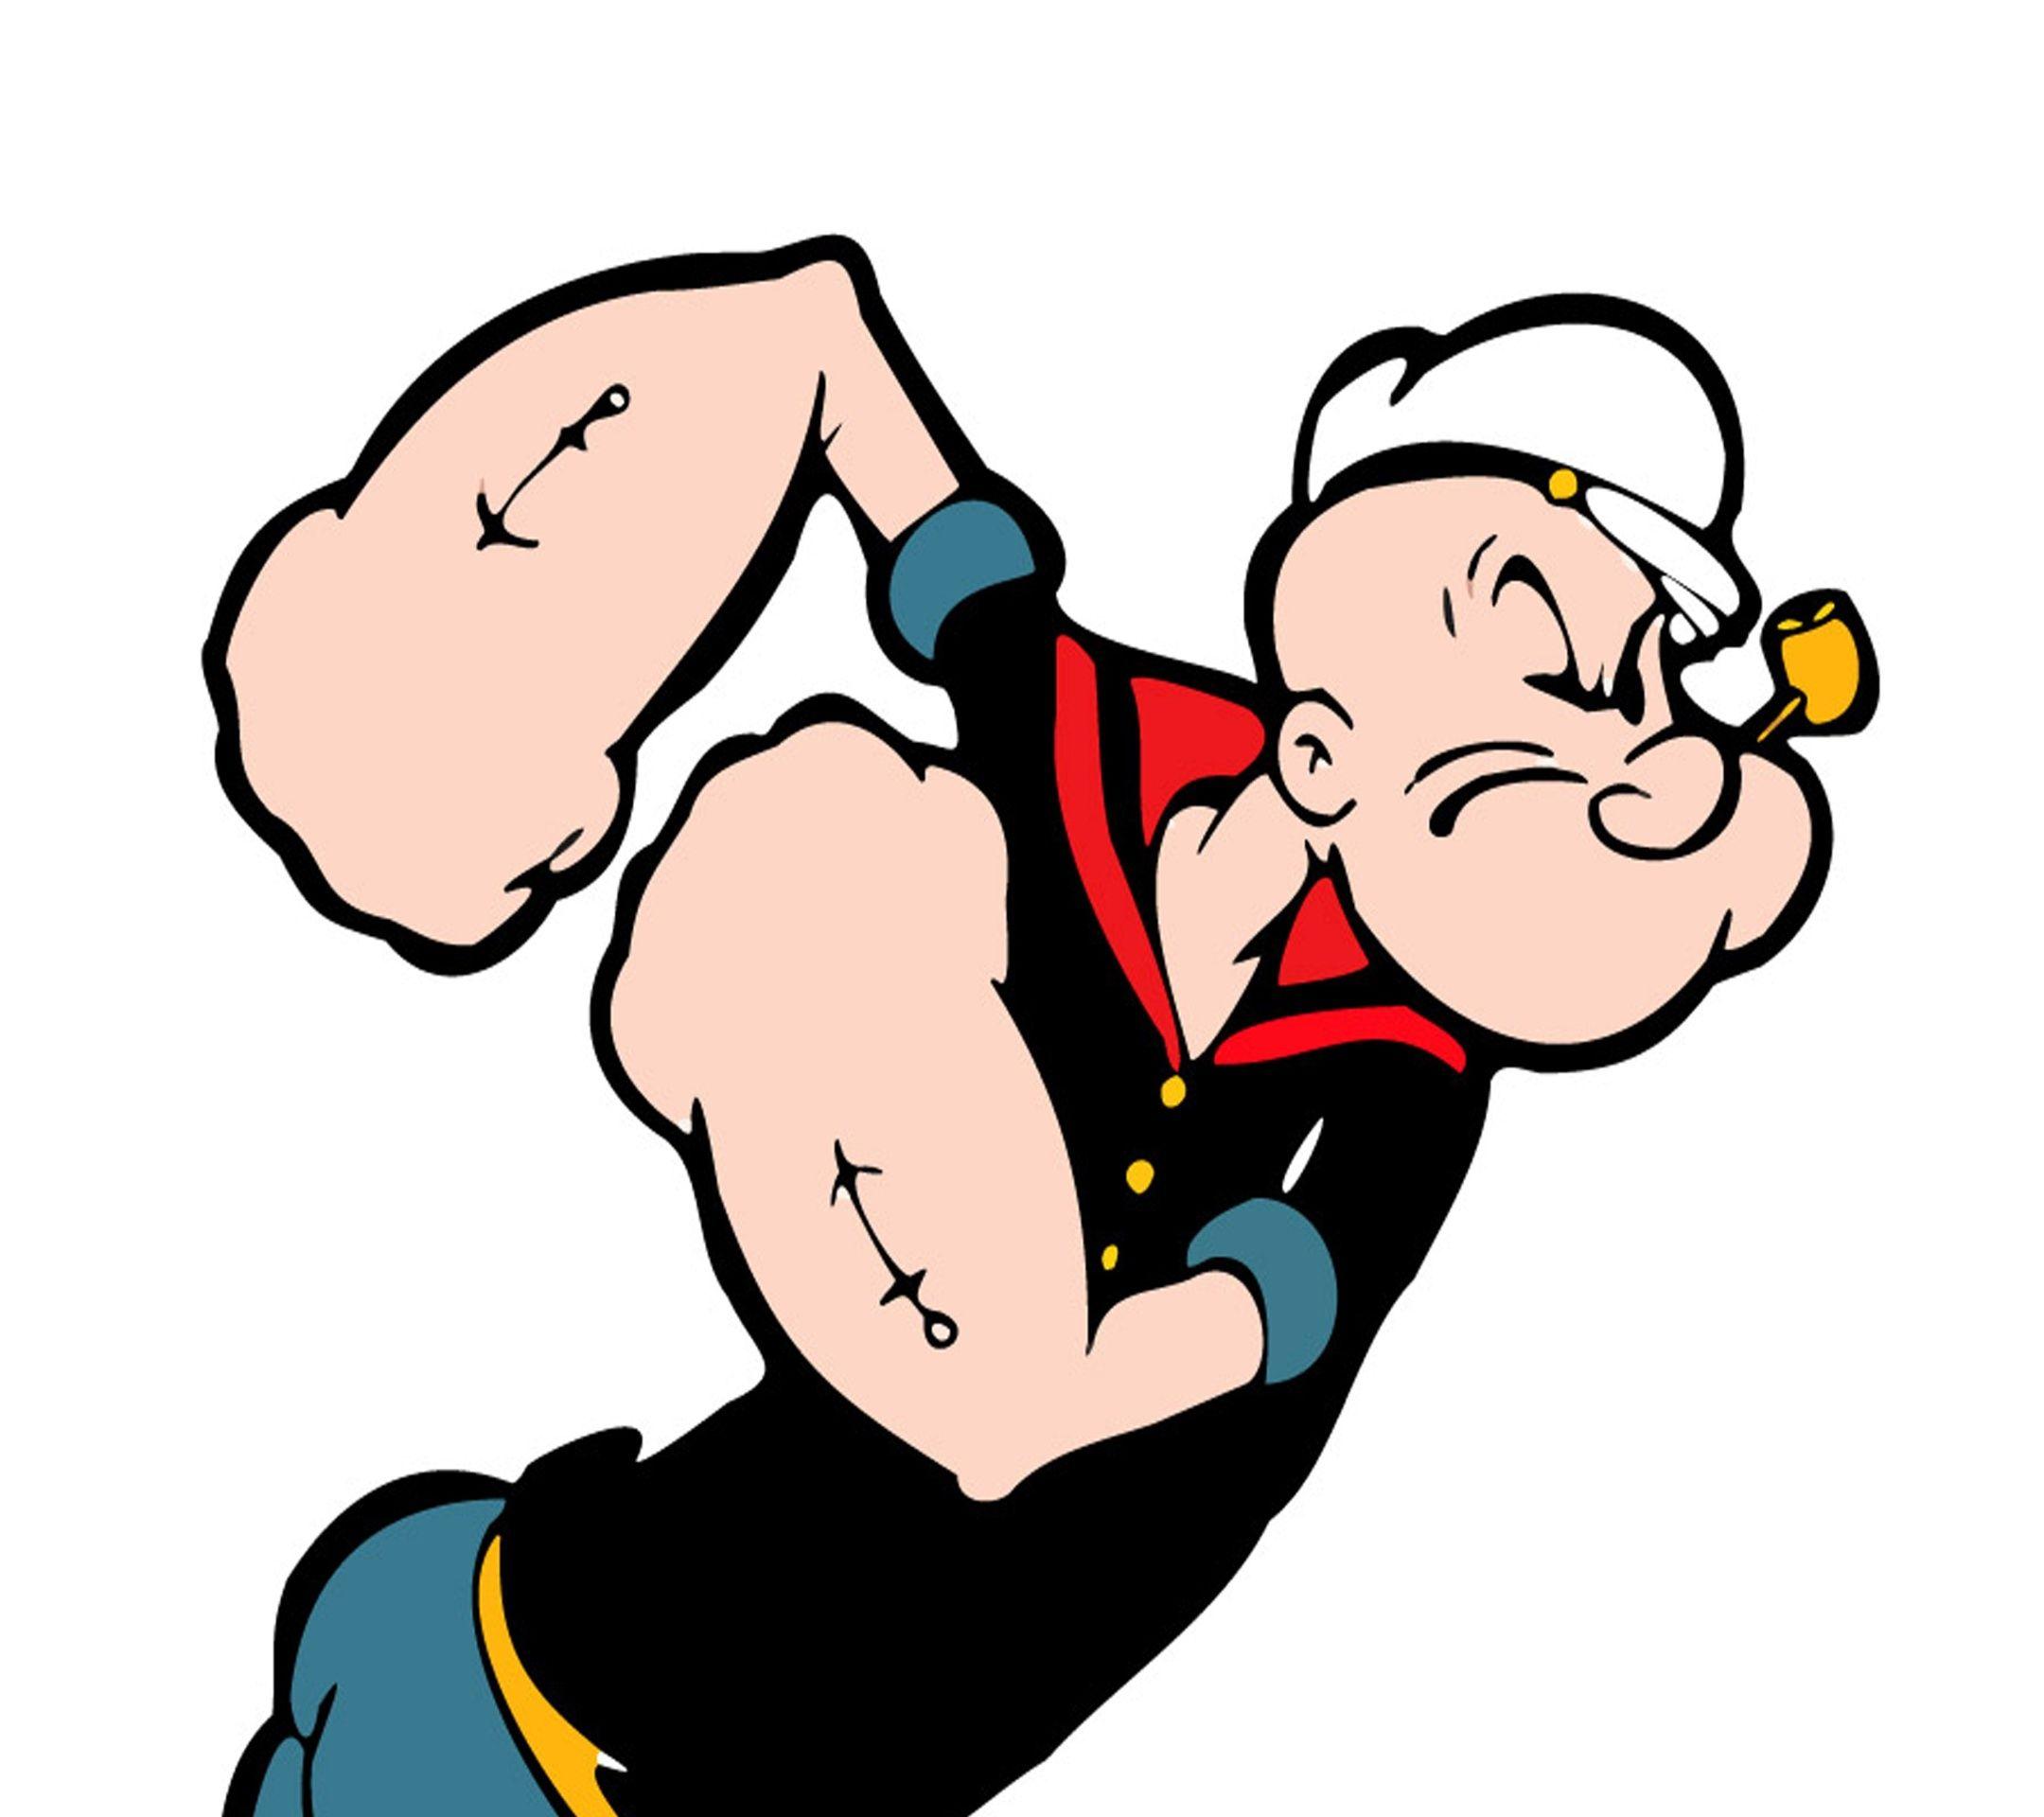 Popeye With Tattoos HD Popeye Wallpapers  HD Wallpapers  ID 72423